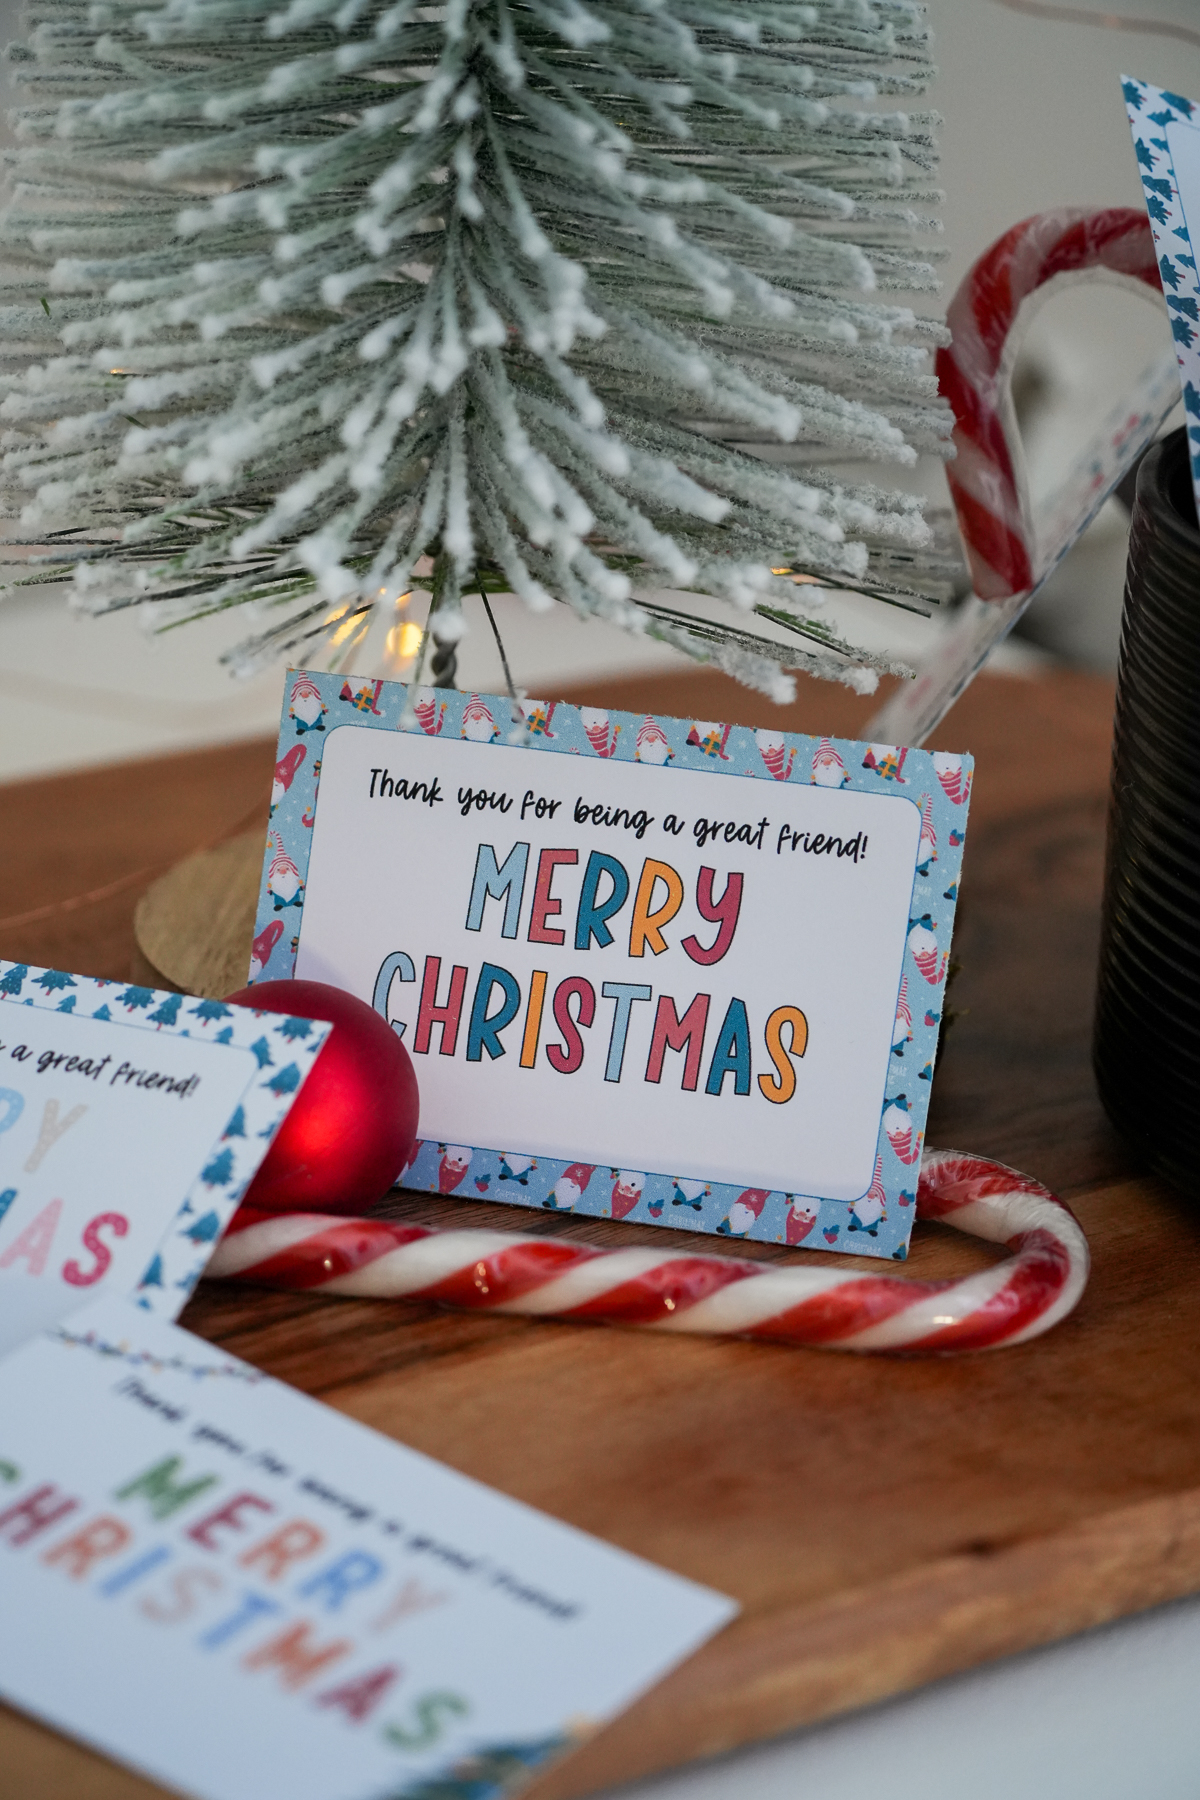 Turn simple candy canes into thoughtful gifts with our free printable Candy Cane Gift Tags. Festive and easy!